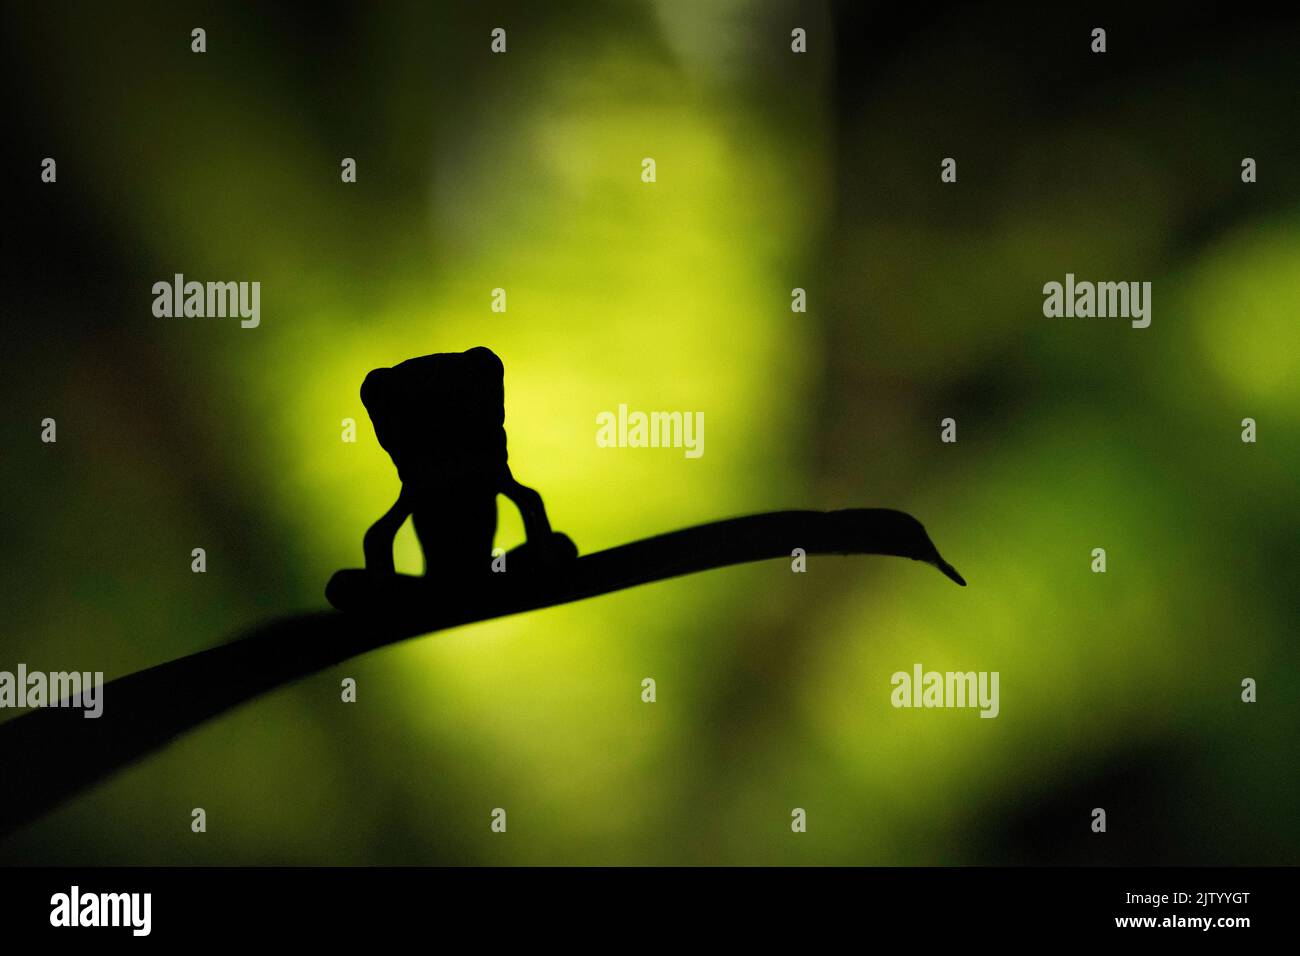 Juvenile Yellow-eyed or Blue-sided Leaf Frog (Agalychnis annae), silhouetted at night, San Jose, Costa Rica Stock Photo